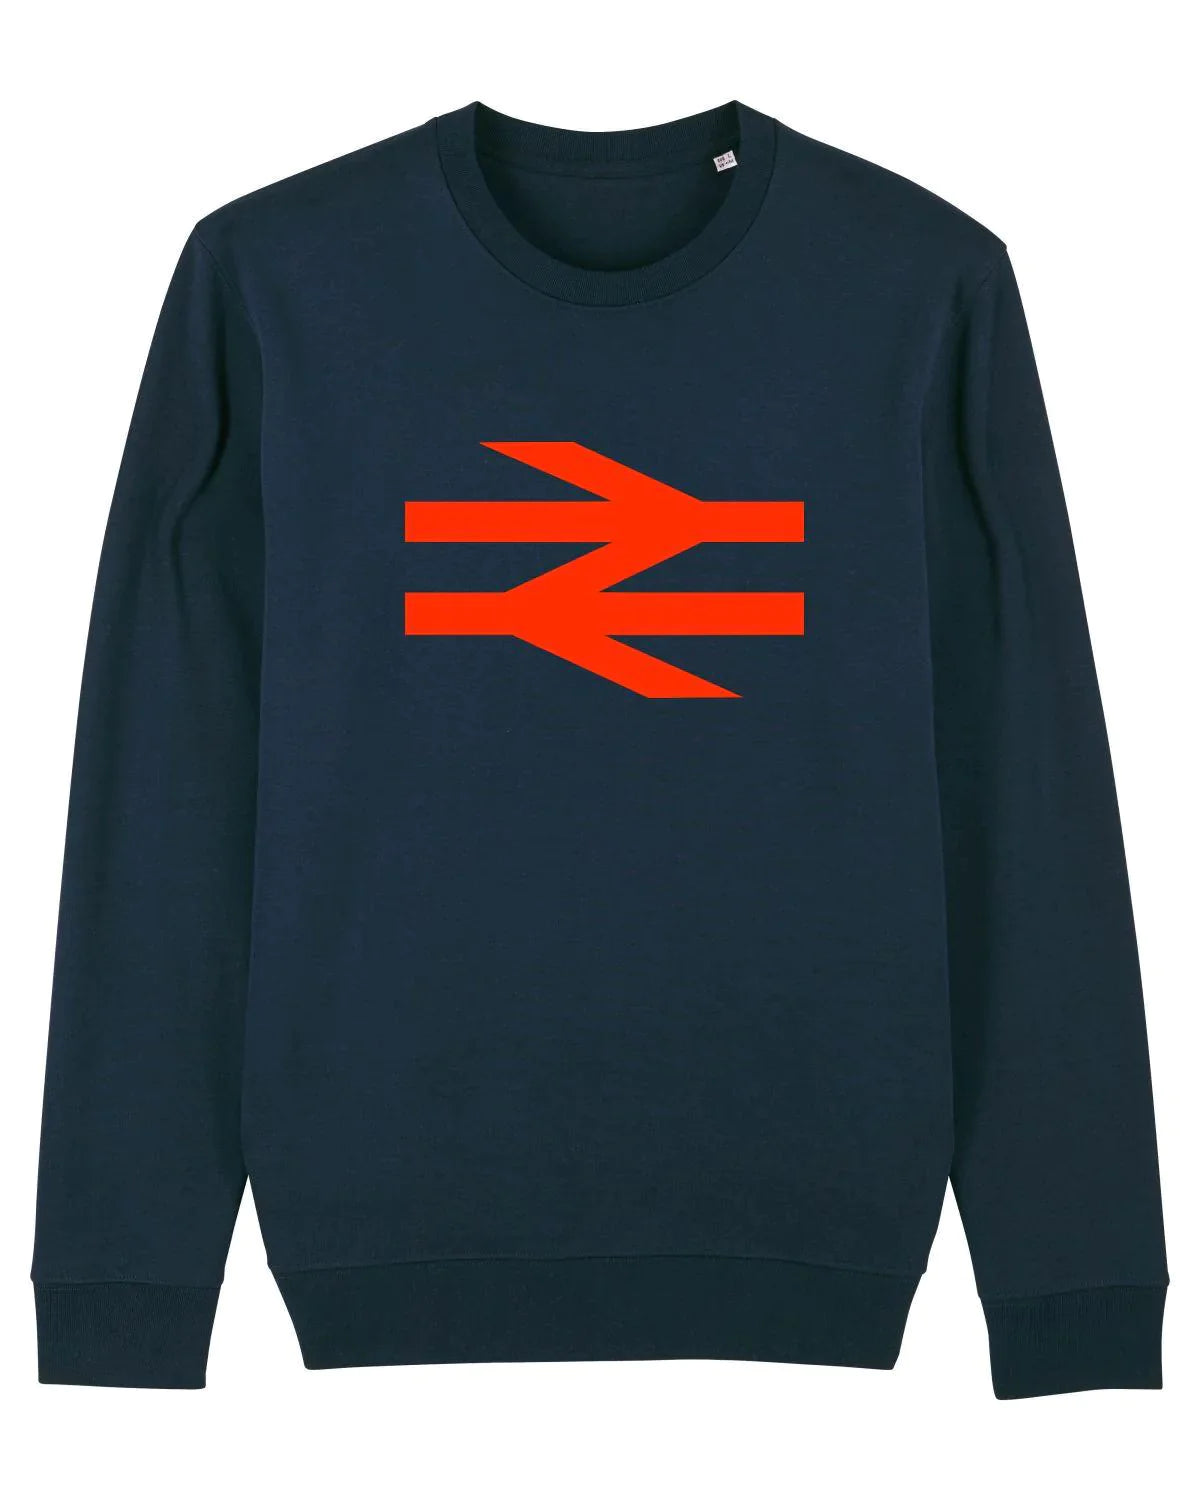 HAVE AN AWAY DAY:  Sweatshirt As Worn By Damon Albarn (Blur) - SOUND IS COLOUR